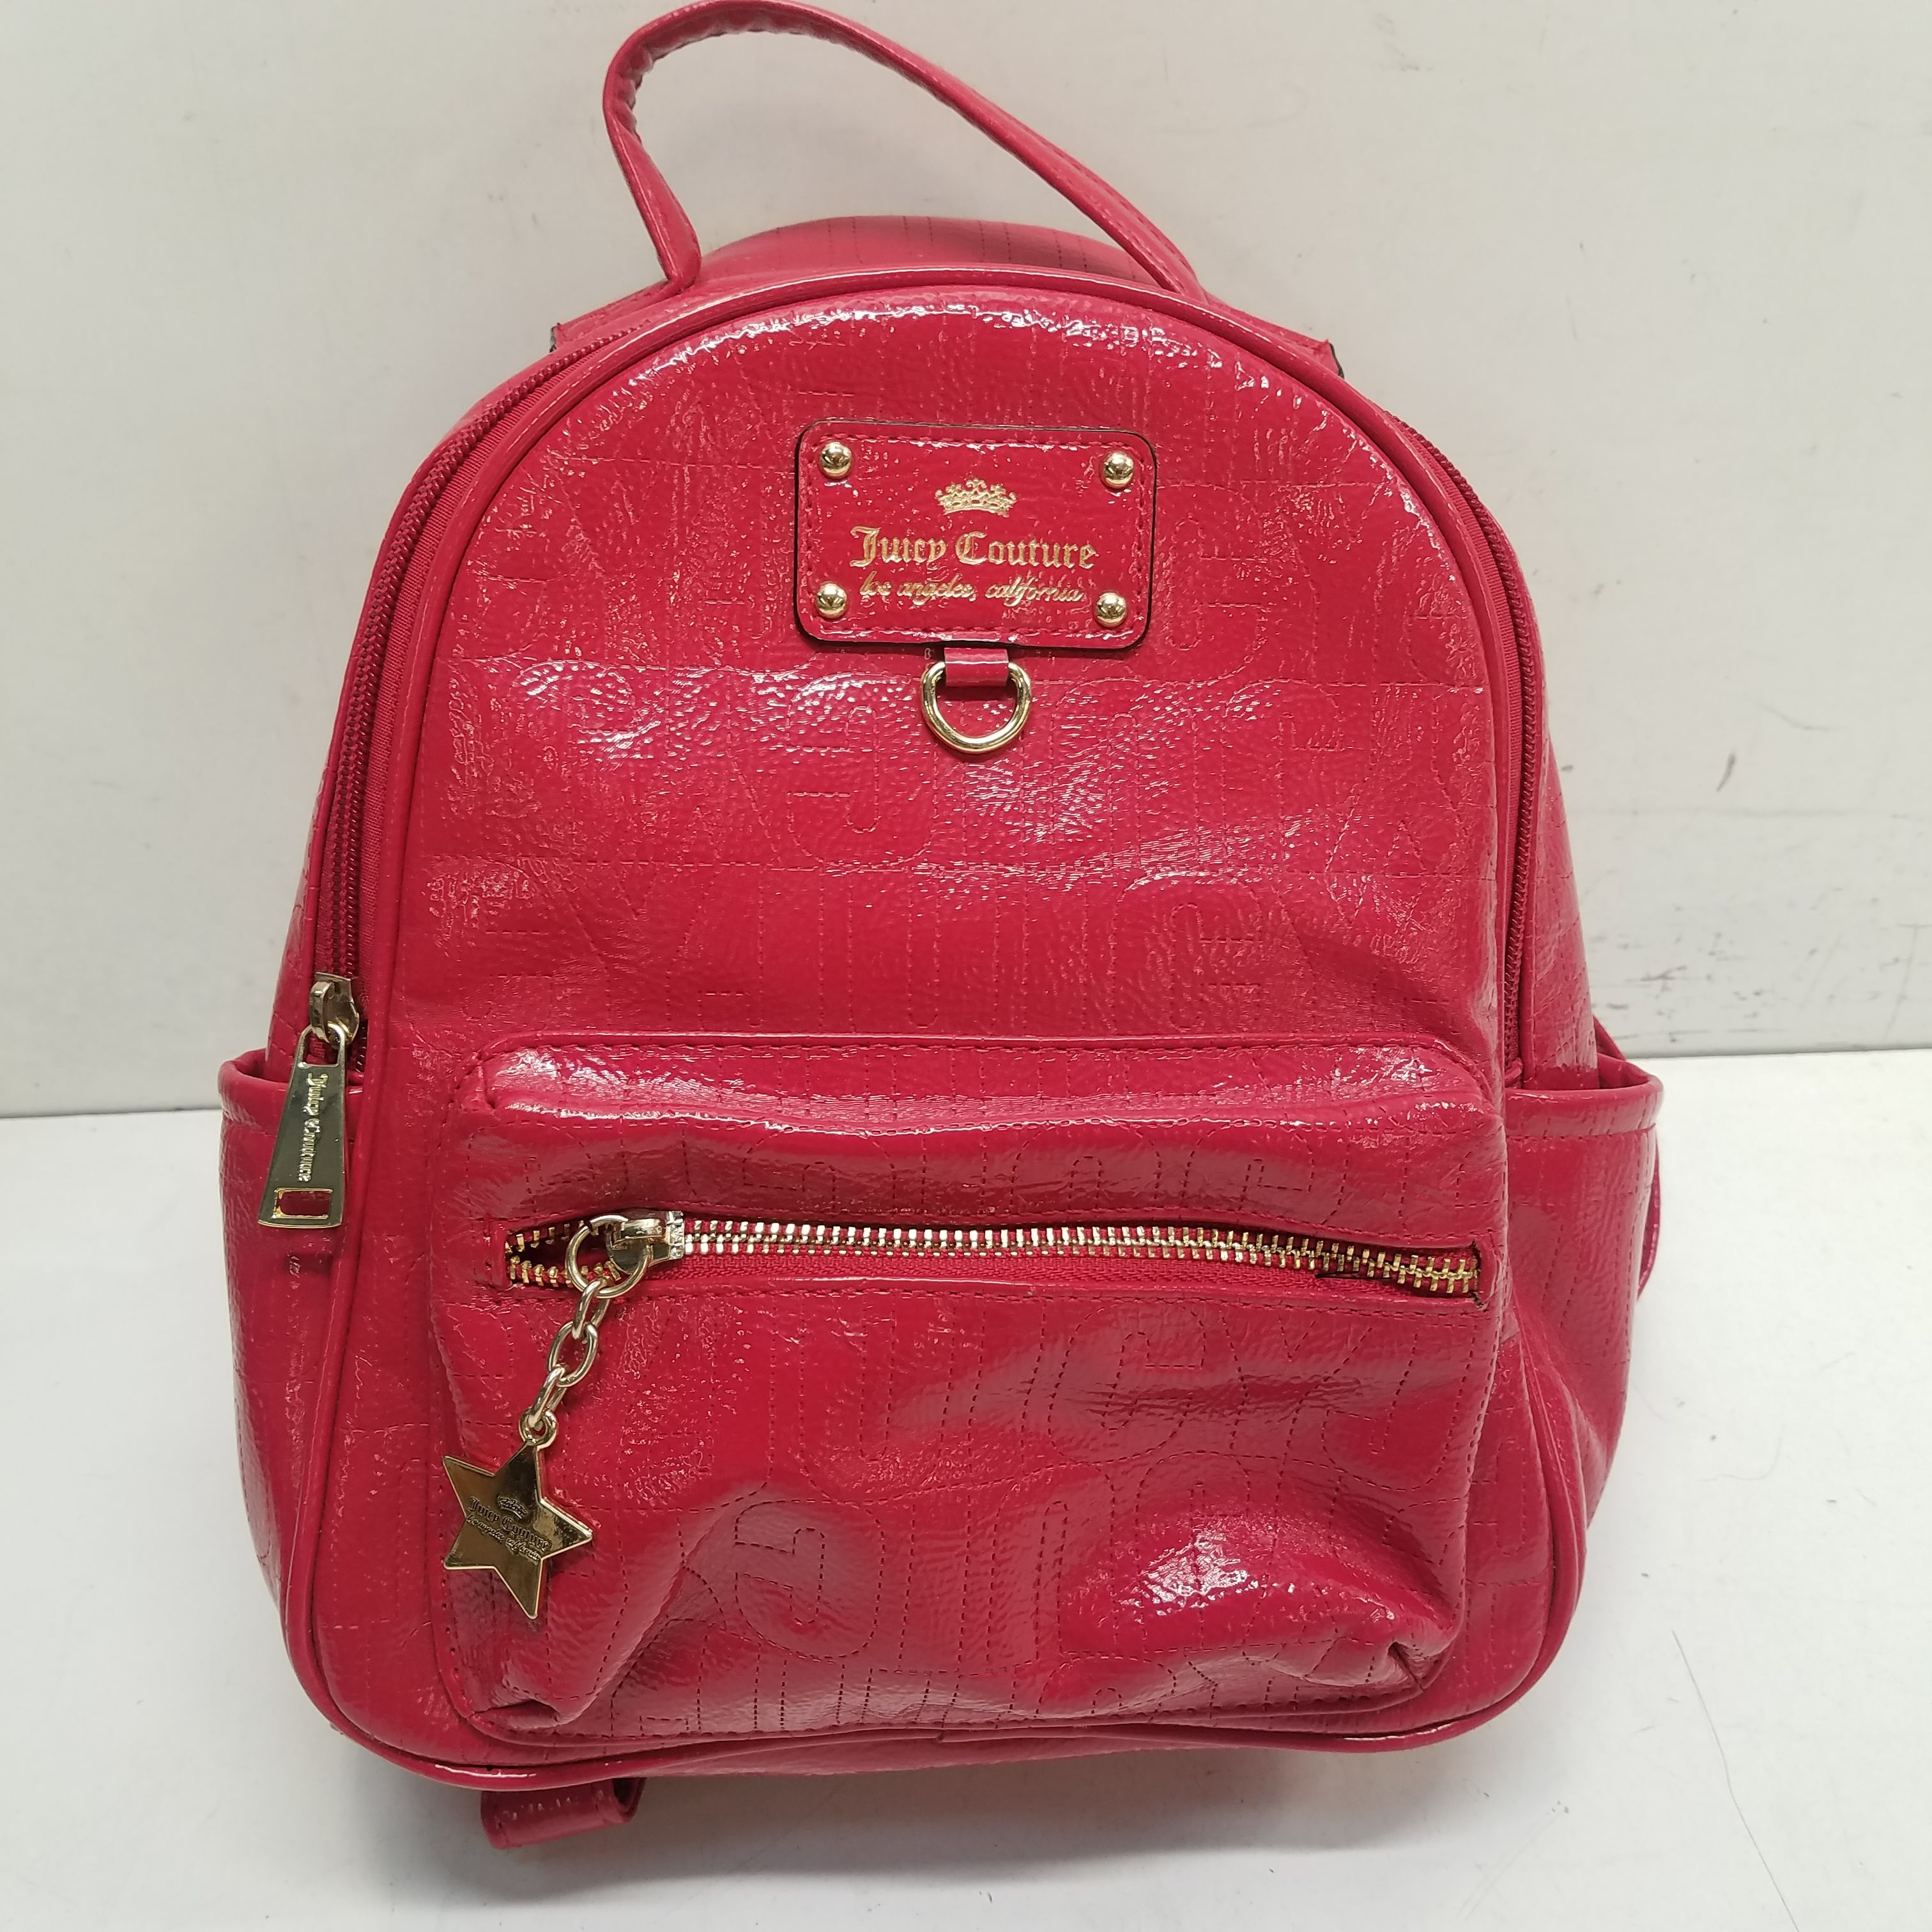 Juicy Couture New Mini Backpack in Pink